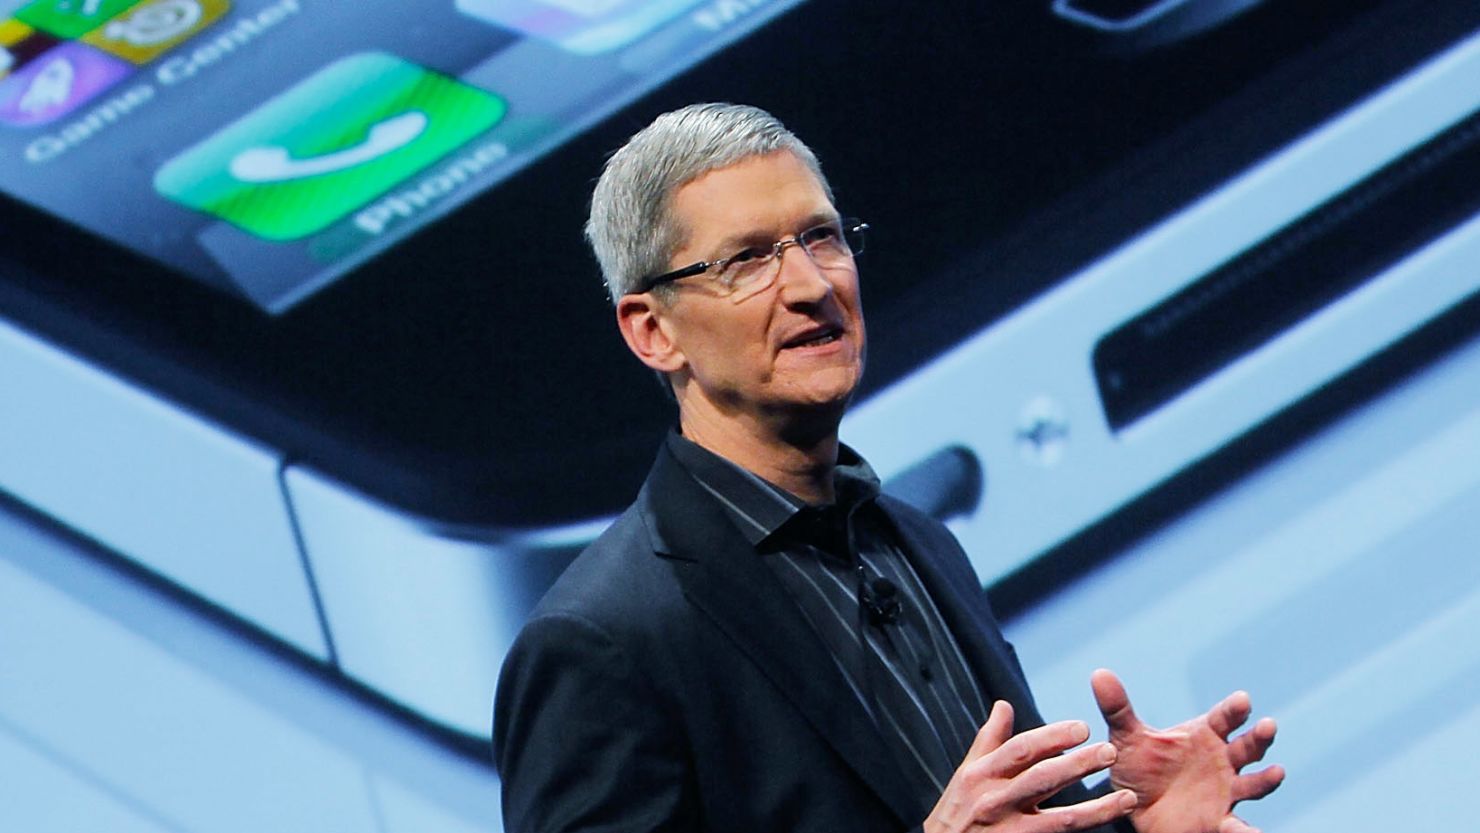 Will Apple's Tim Cook be unveiling the next iPhone this summer? One report suggests yes.